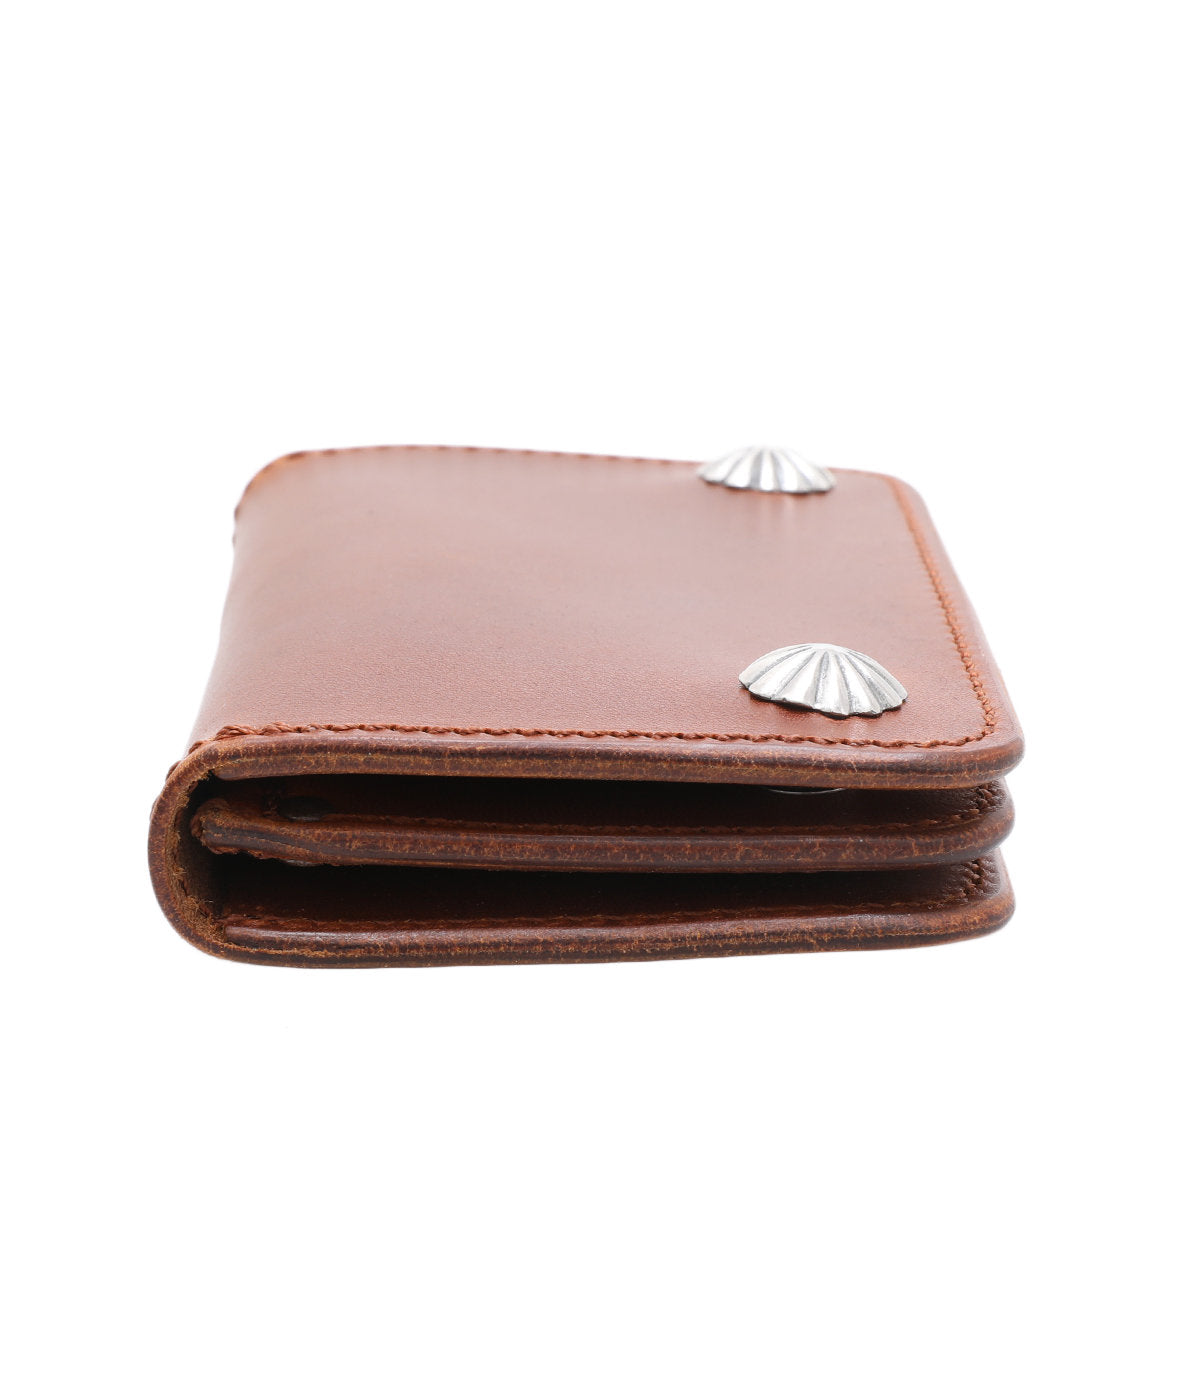 LARRY SMITH TRUCKERS WALLET No. 1 (SHELL) -S-